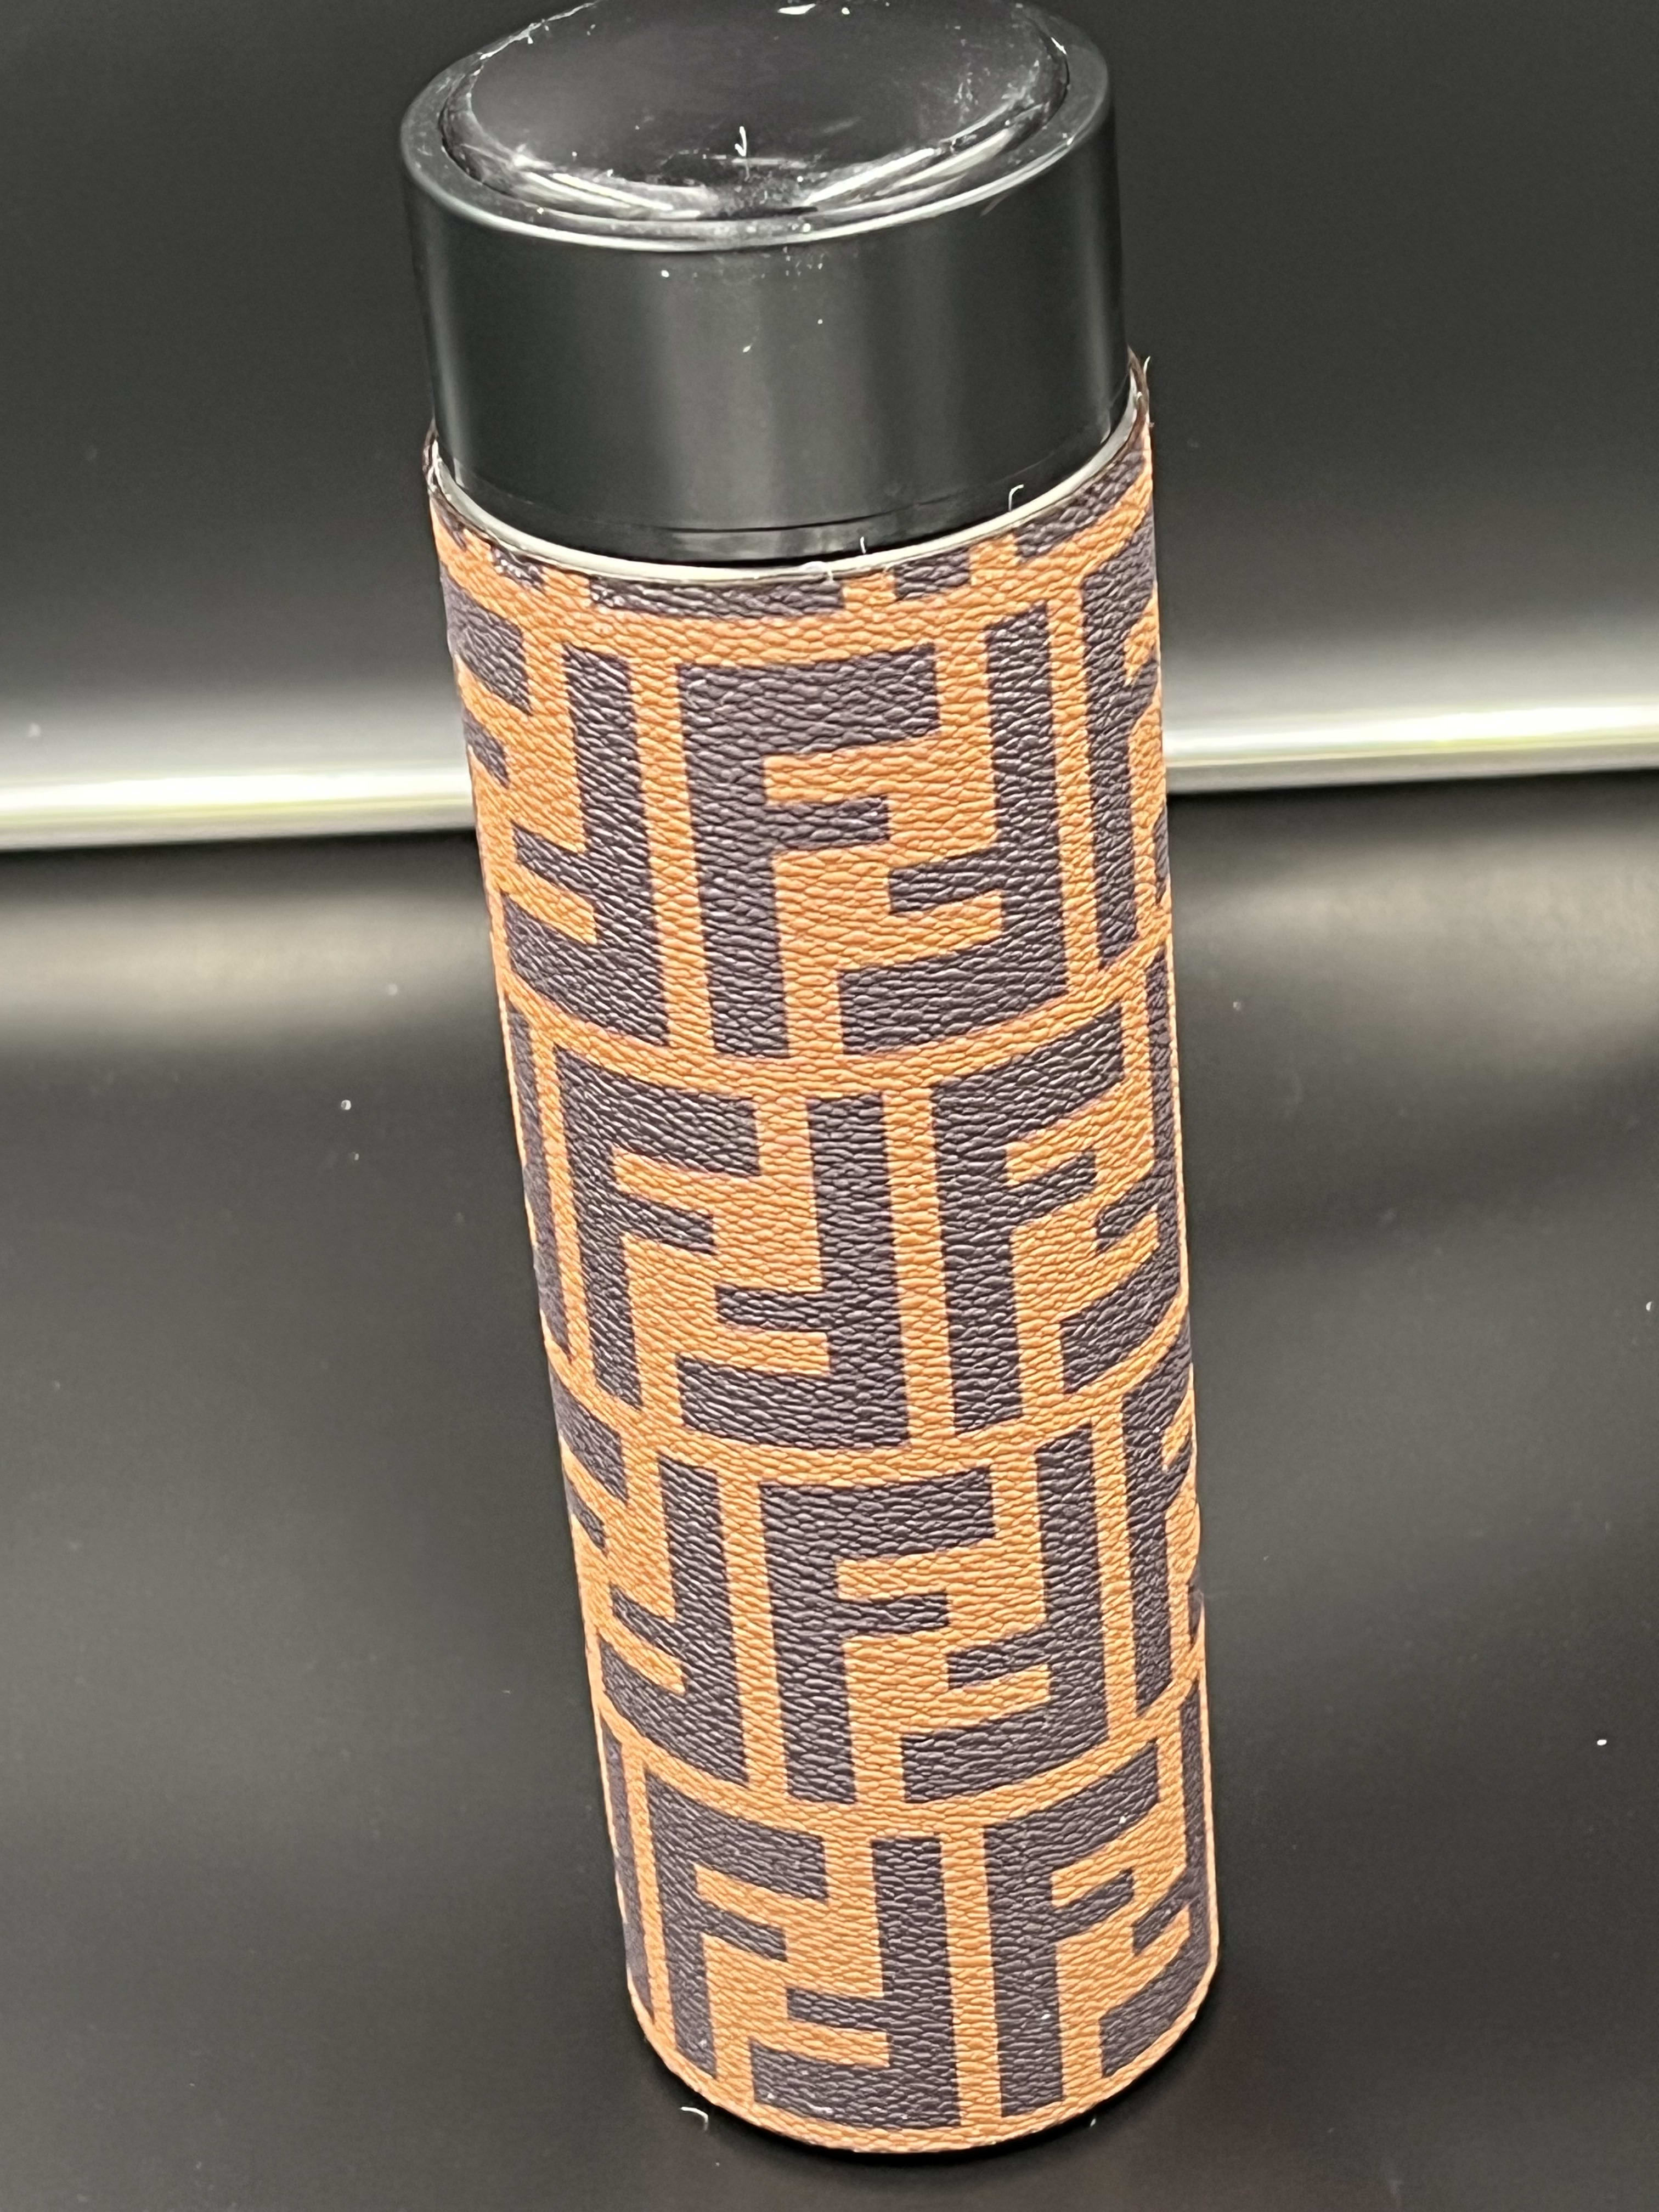 1970s Gucci Brown Monogram Canvas Thermos Vacuum Flask